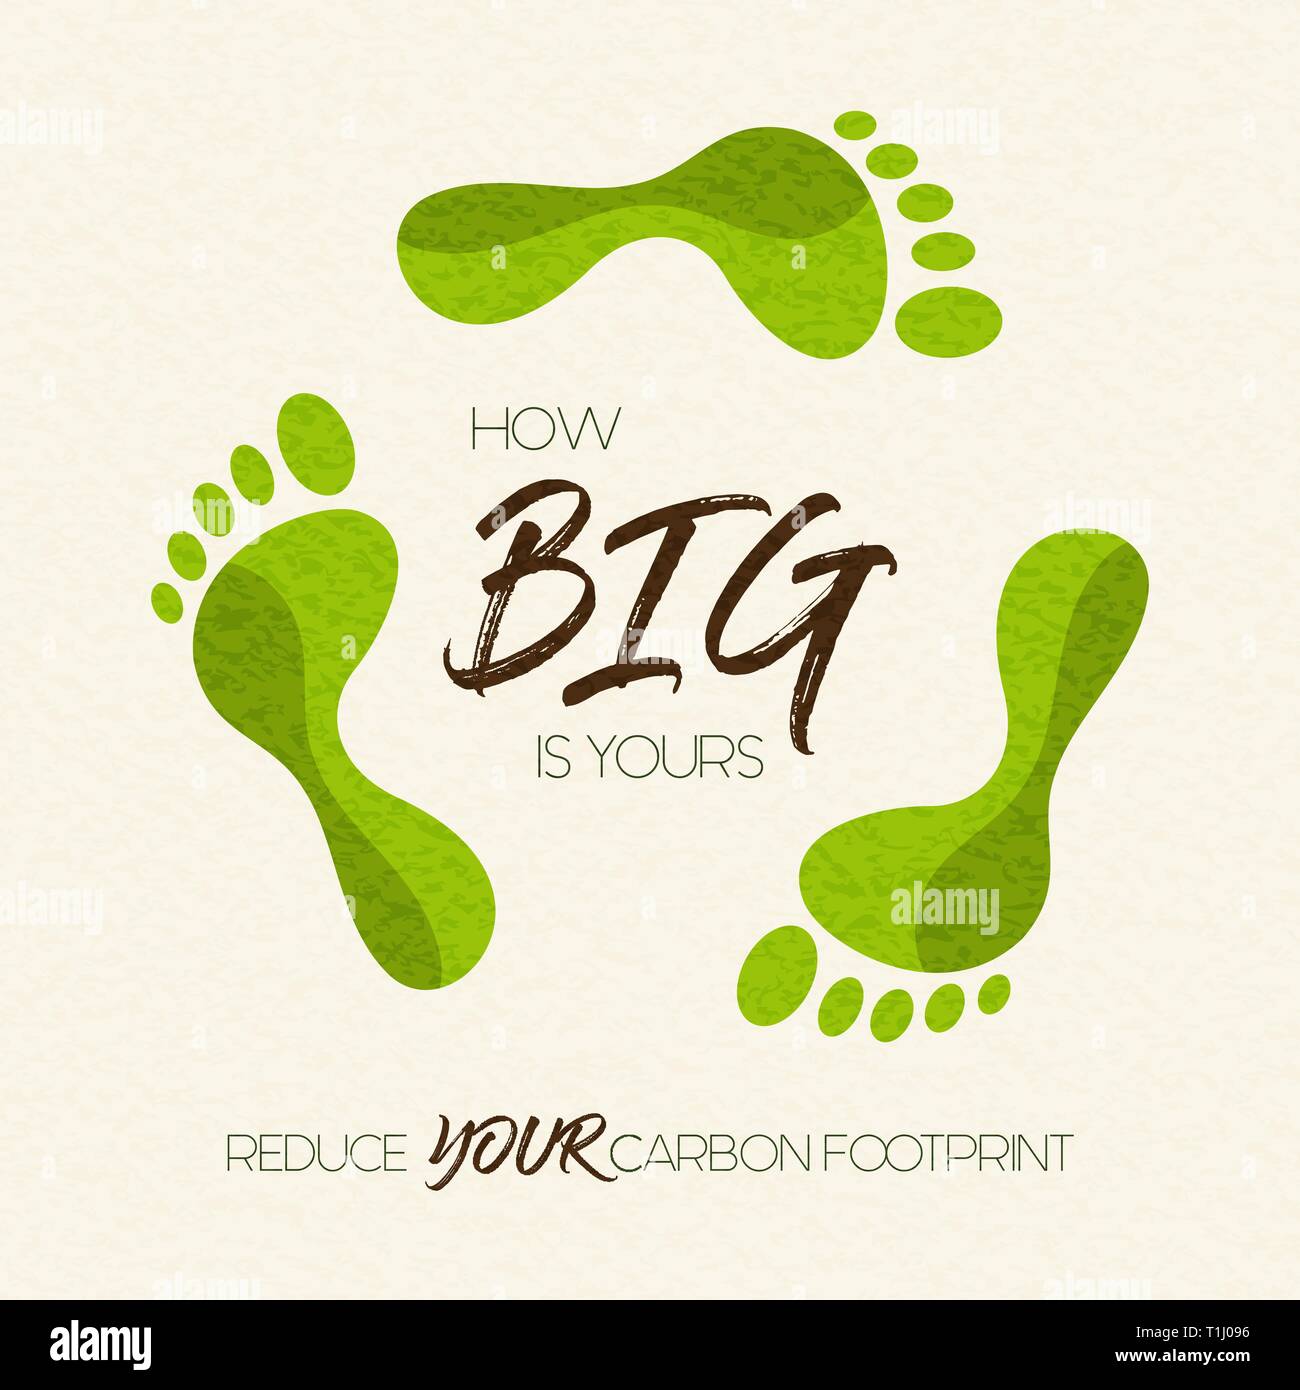 International Earth Day illustration of carbon footprint awareness message. Green foot shape concept for nature care. Stock Vector